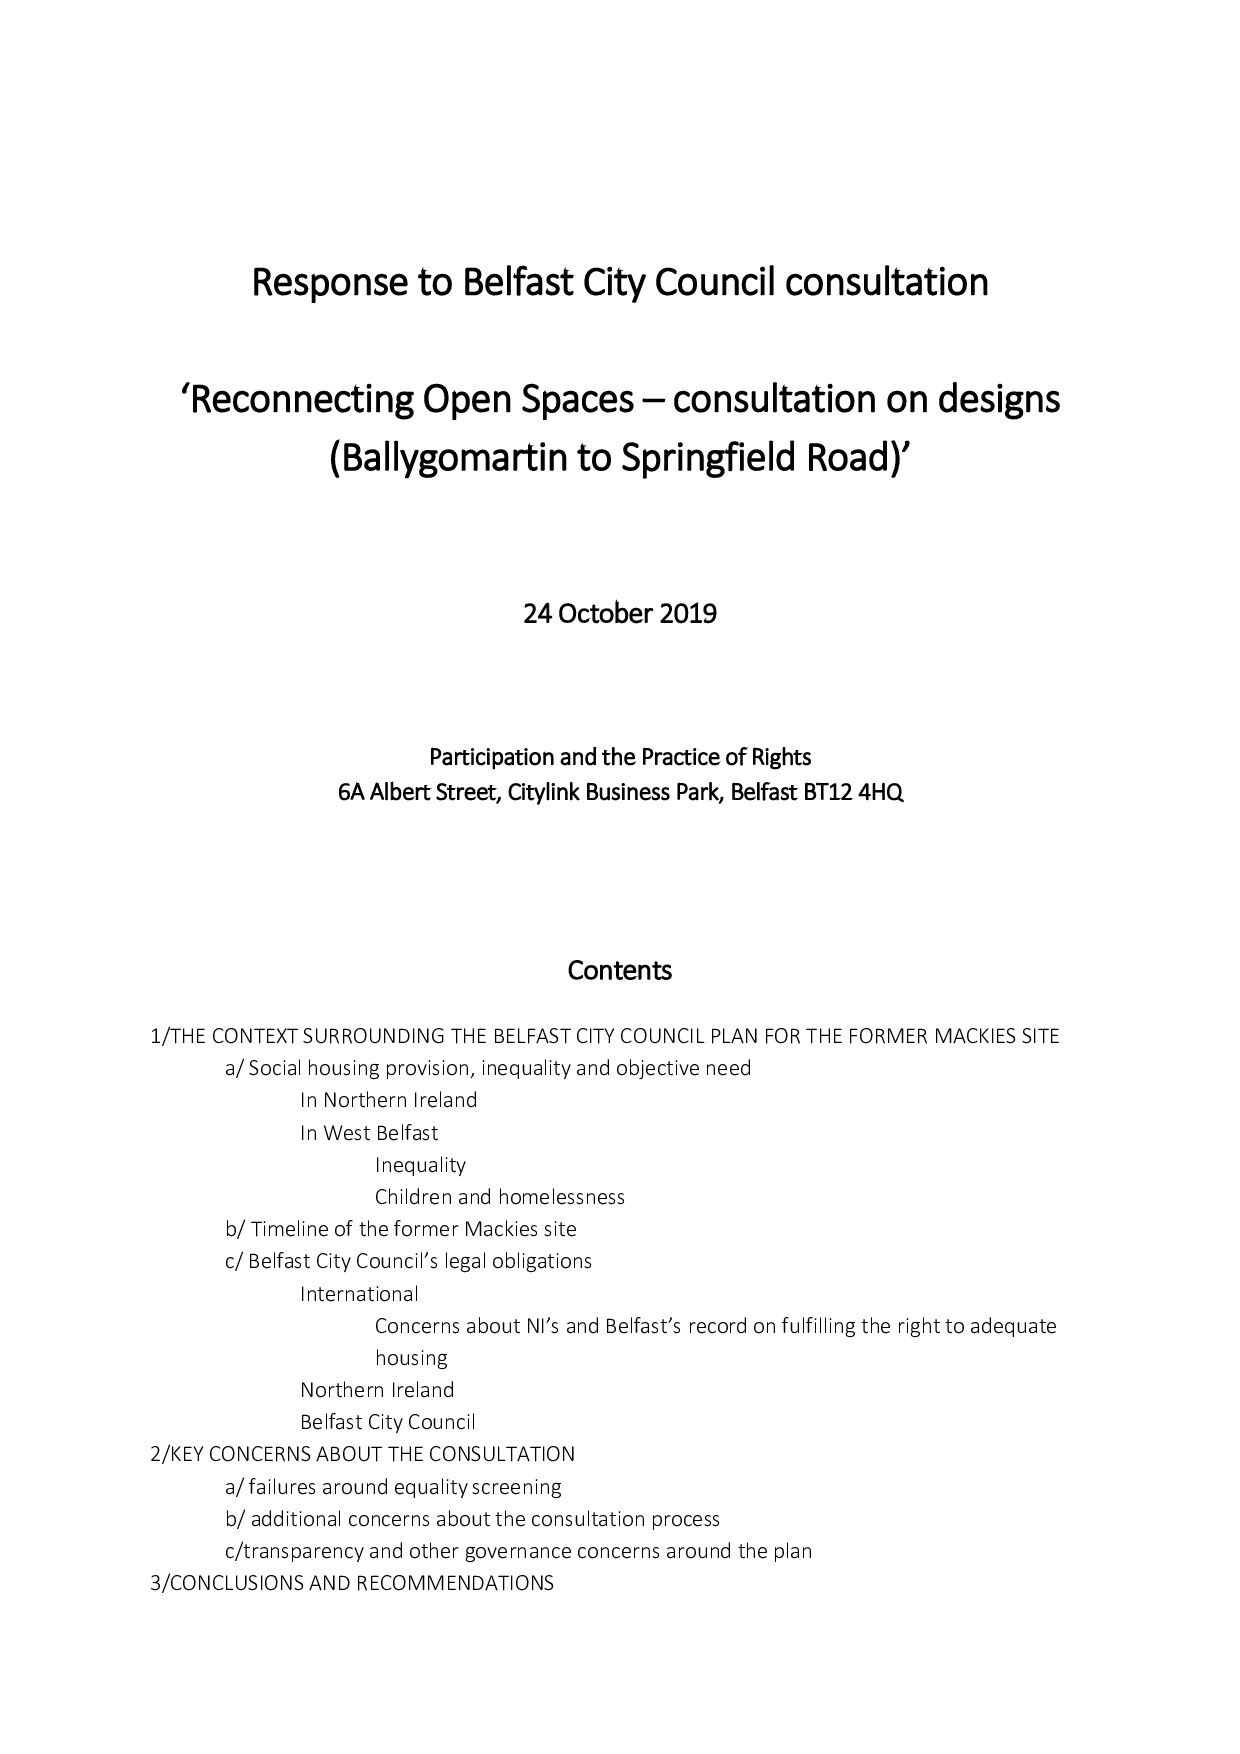 PPR's Response to Belfast City Council's "Reconnecting Open Spaces" Consultation